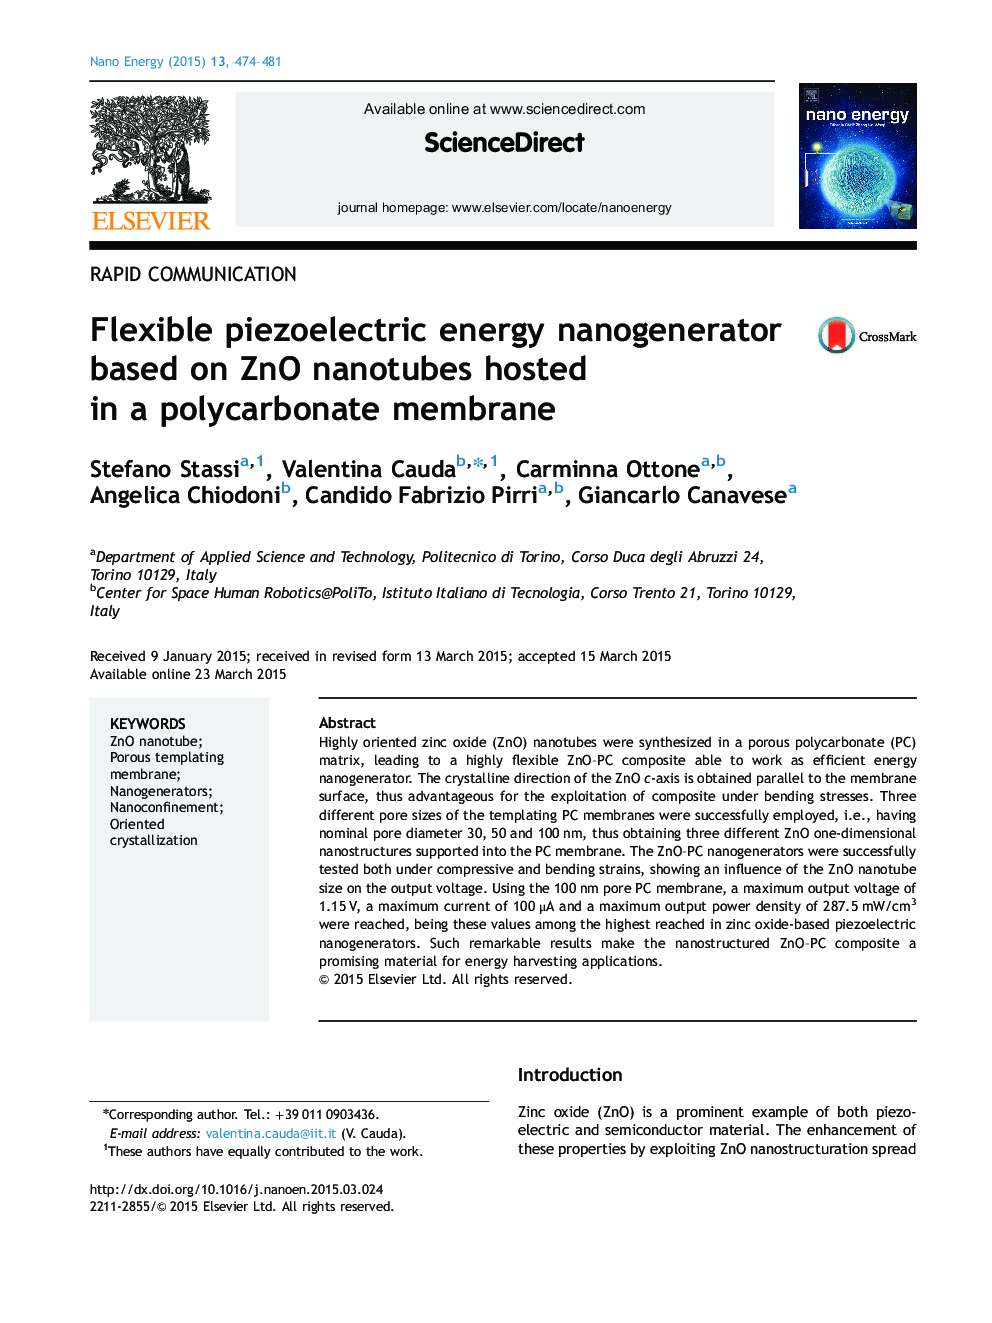 Flexible piezoelectric energy nanogenerator based on ZnO nanotubes hosted in a polycarbonate membrane